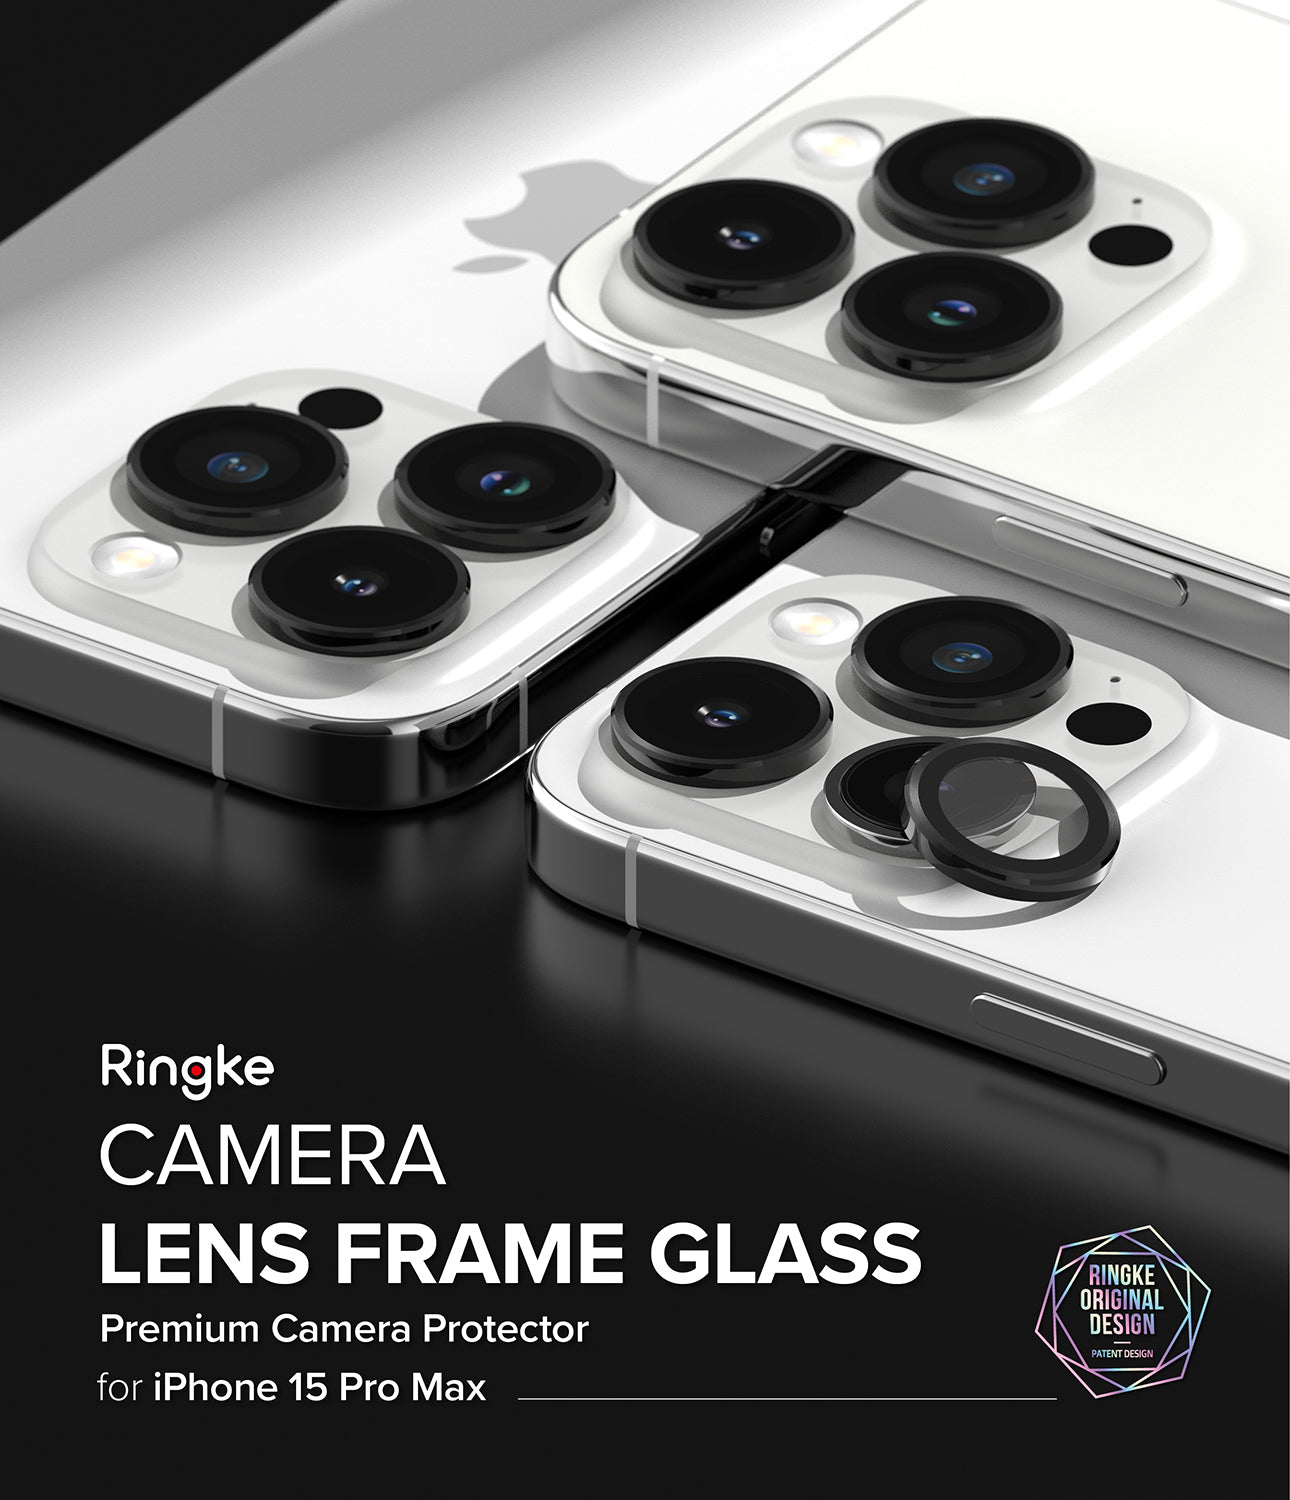 iPhone 15 Pro Max | Camera Lens Frame Glass - By Ringke